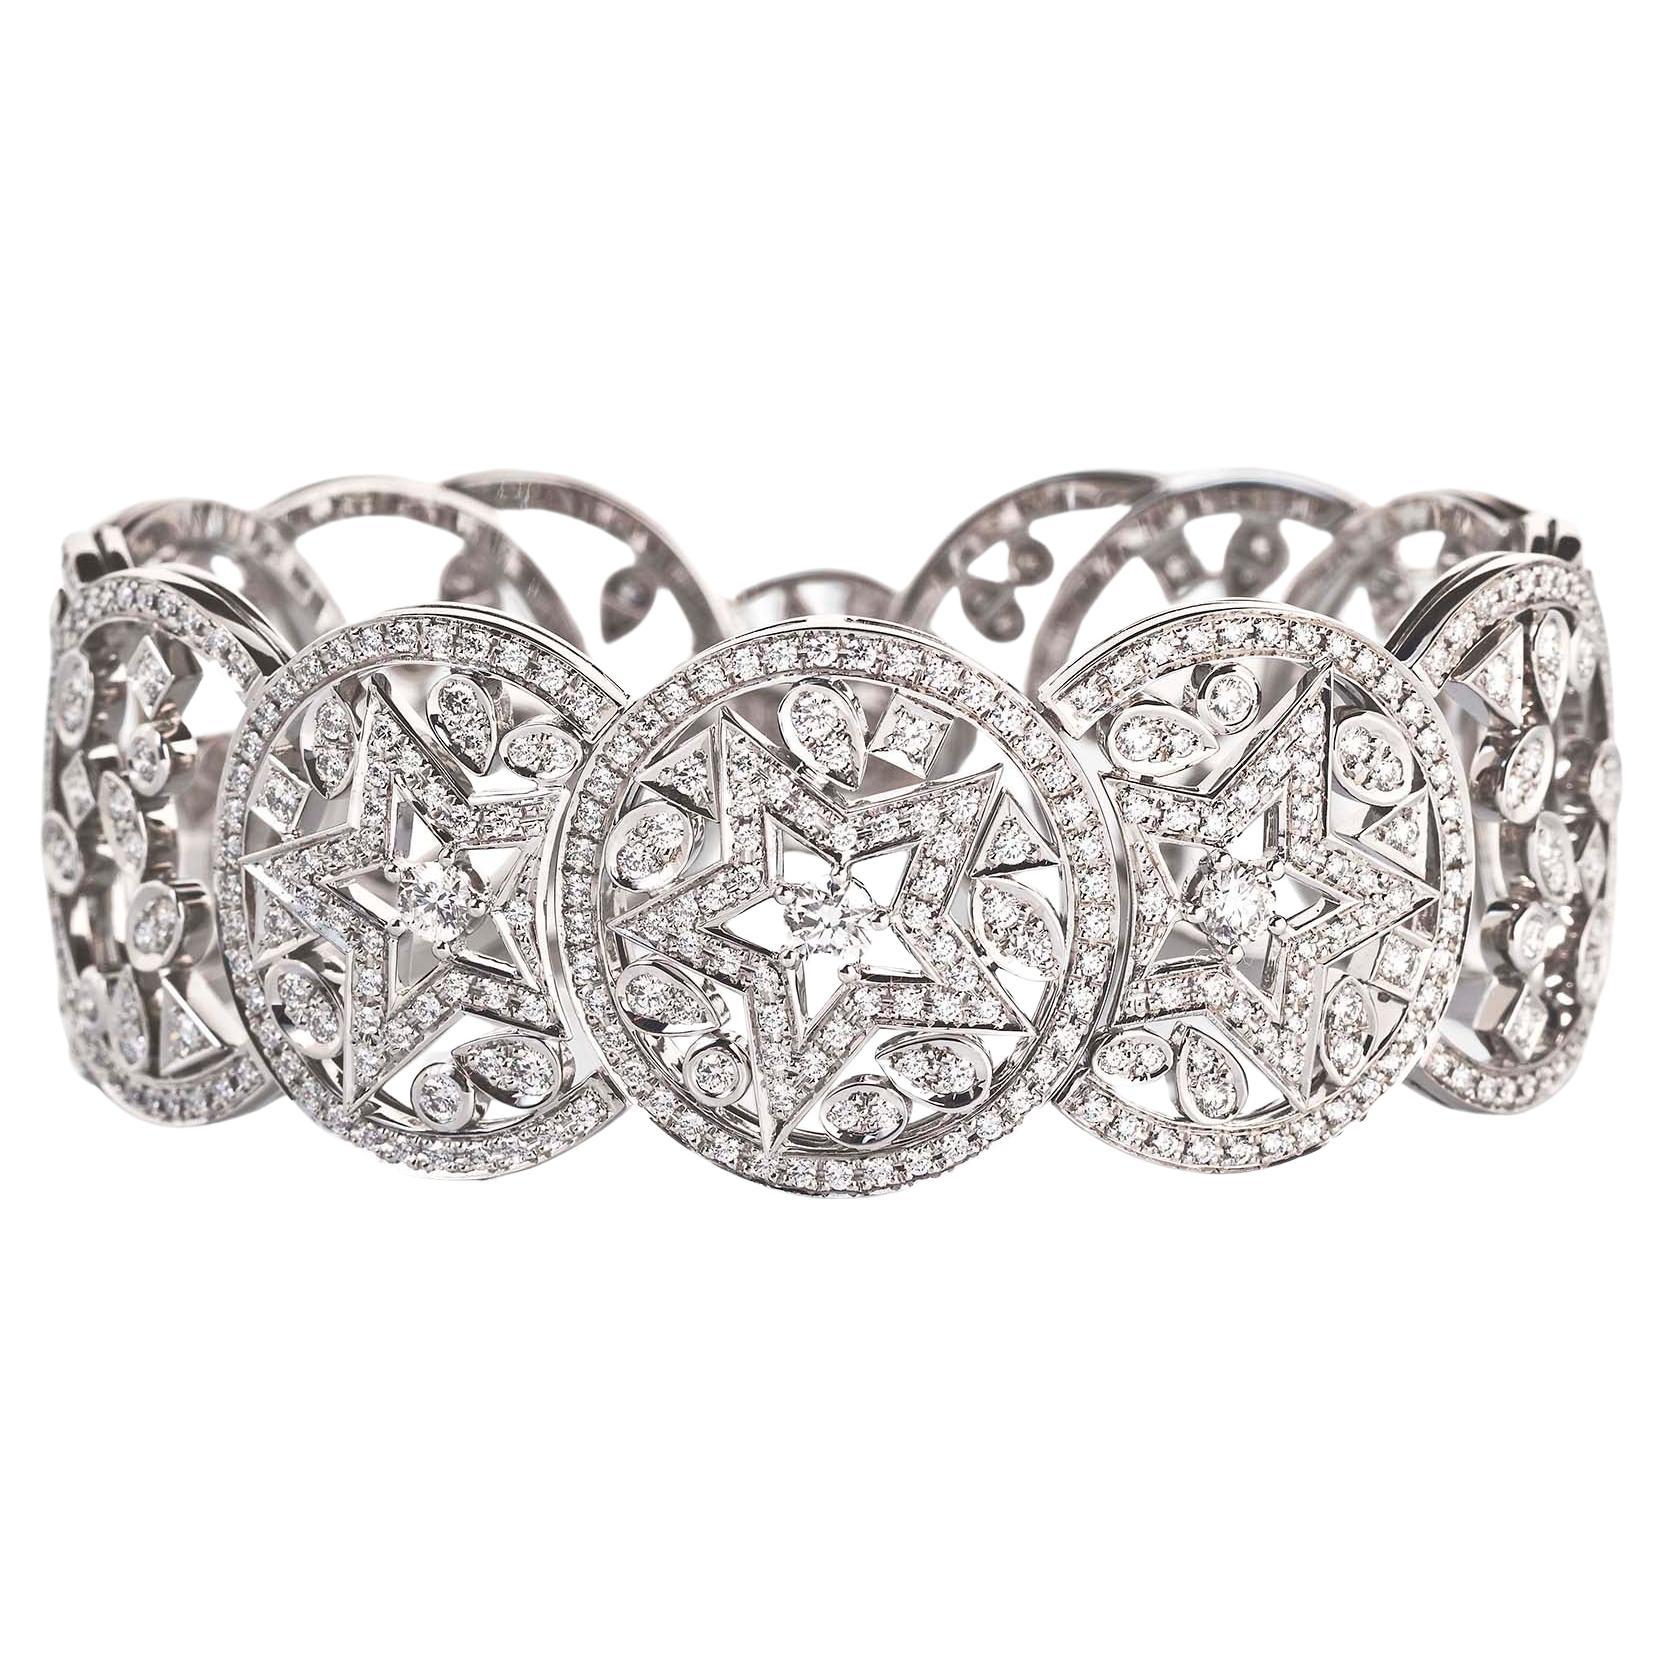 Chanel High Jewelry White Gold and Diamond Bracelet, Les Intemporels Collection